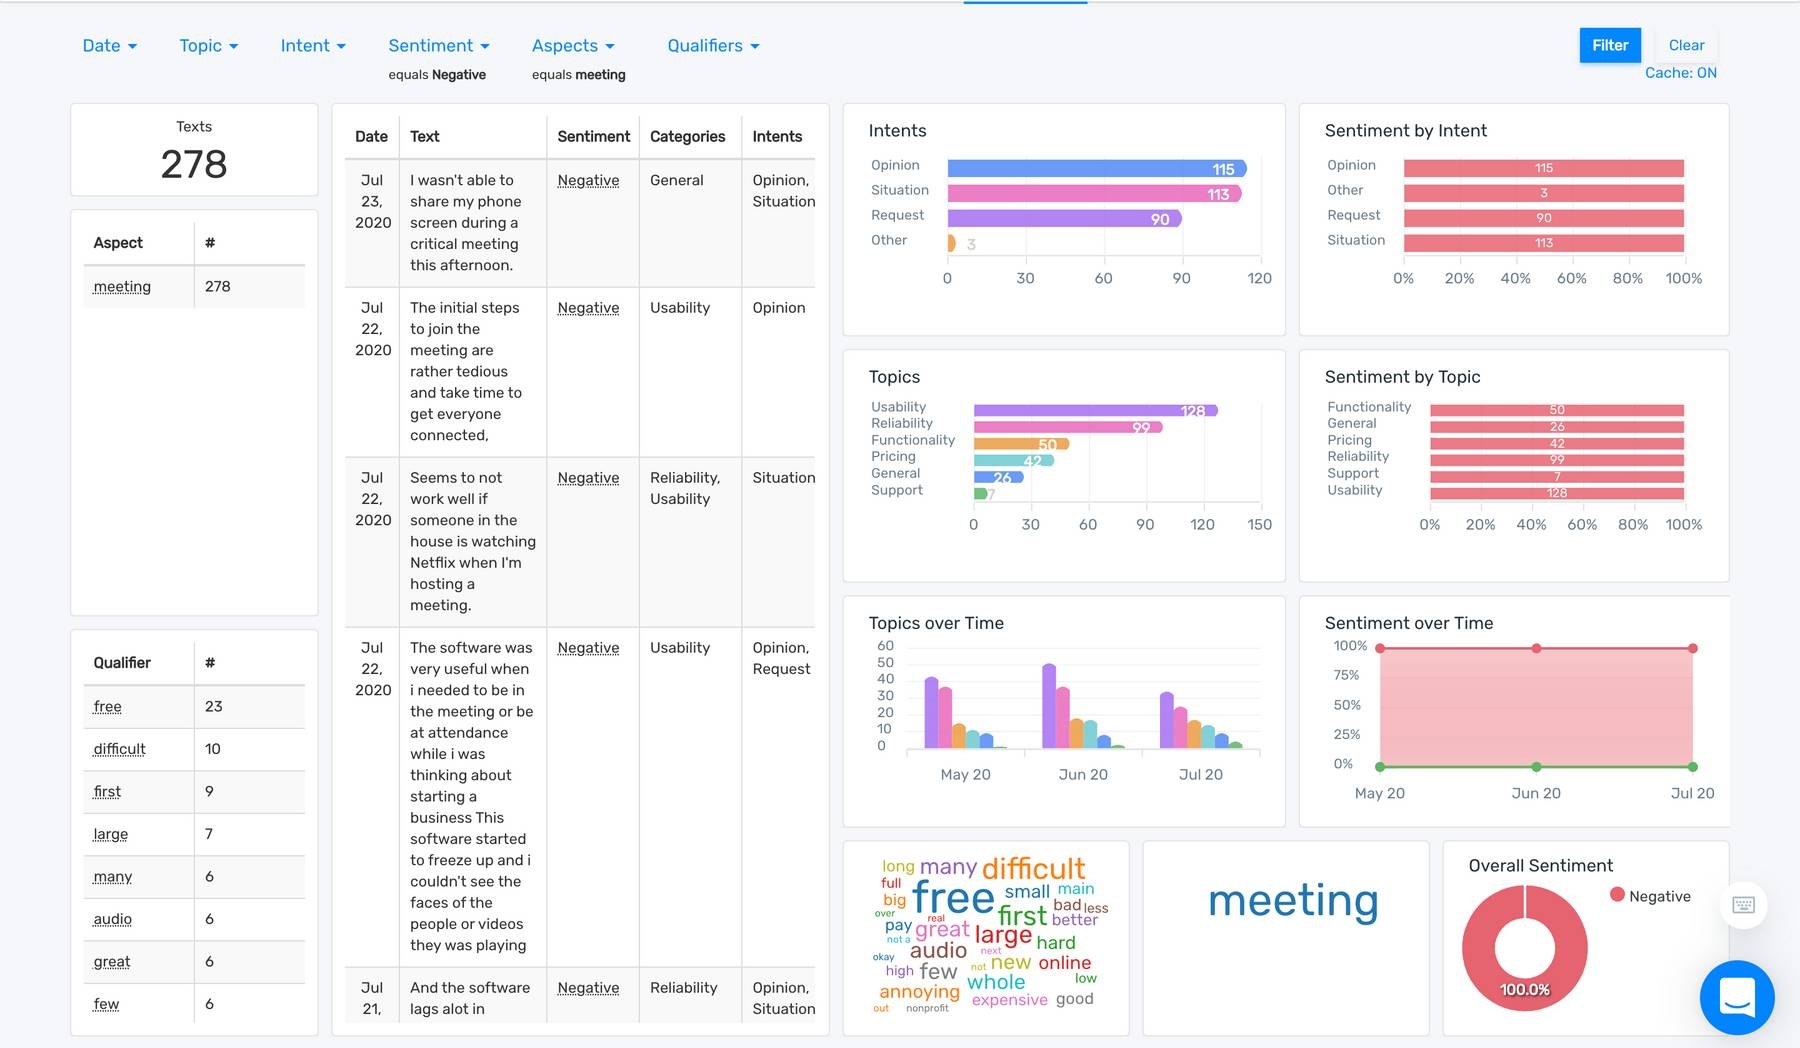 MonkeyLearn Studio dasboard showing a detailed sentiment analysis of the topic 'meeting'